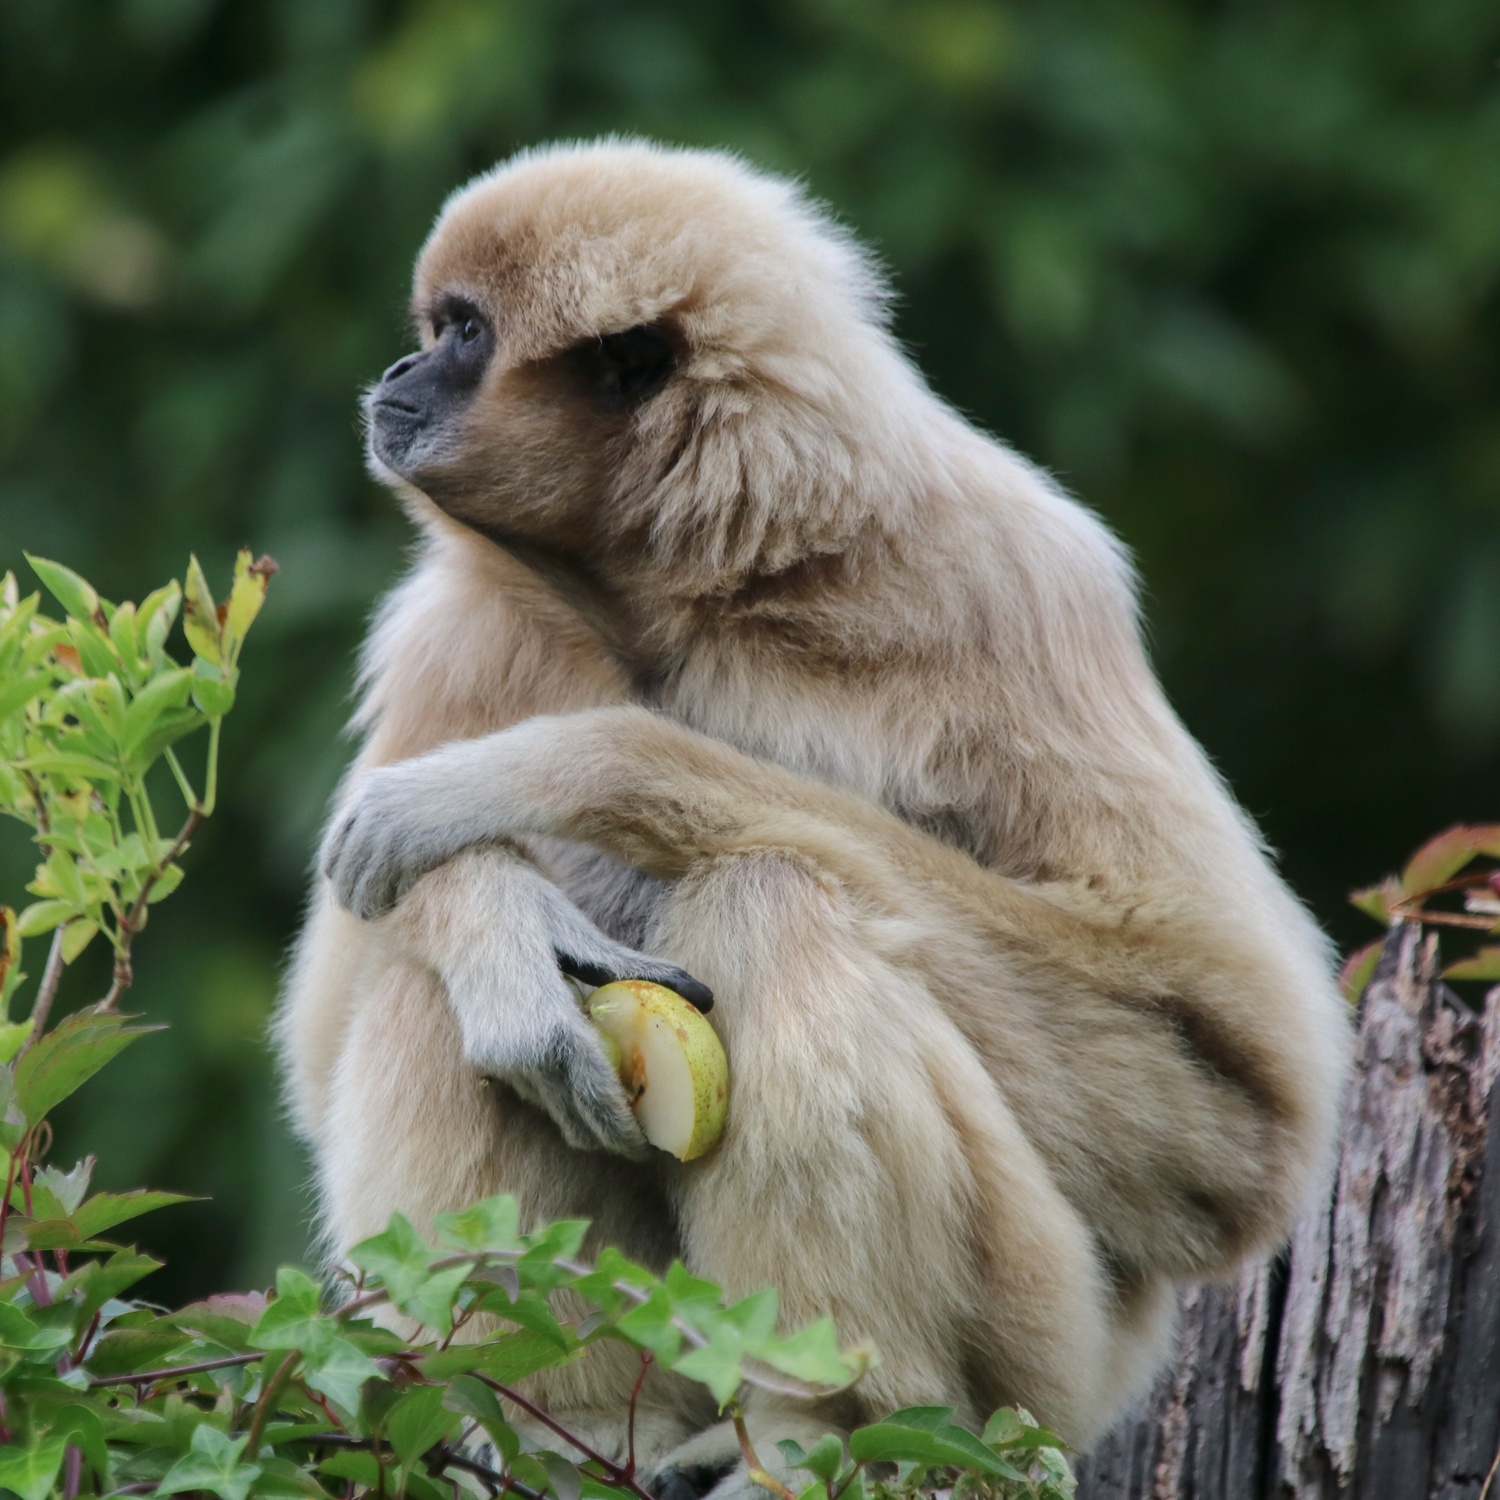 White lar gibbon sitting at top of tree looking left holding an apple